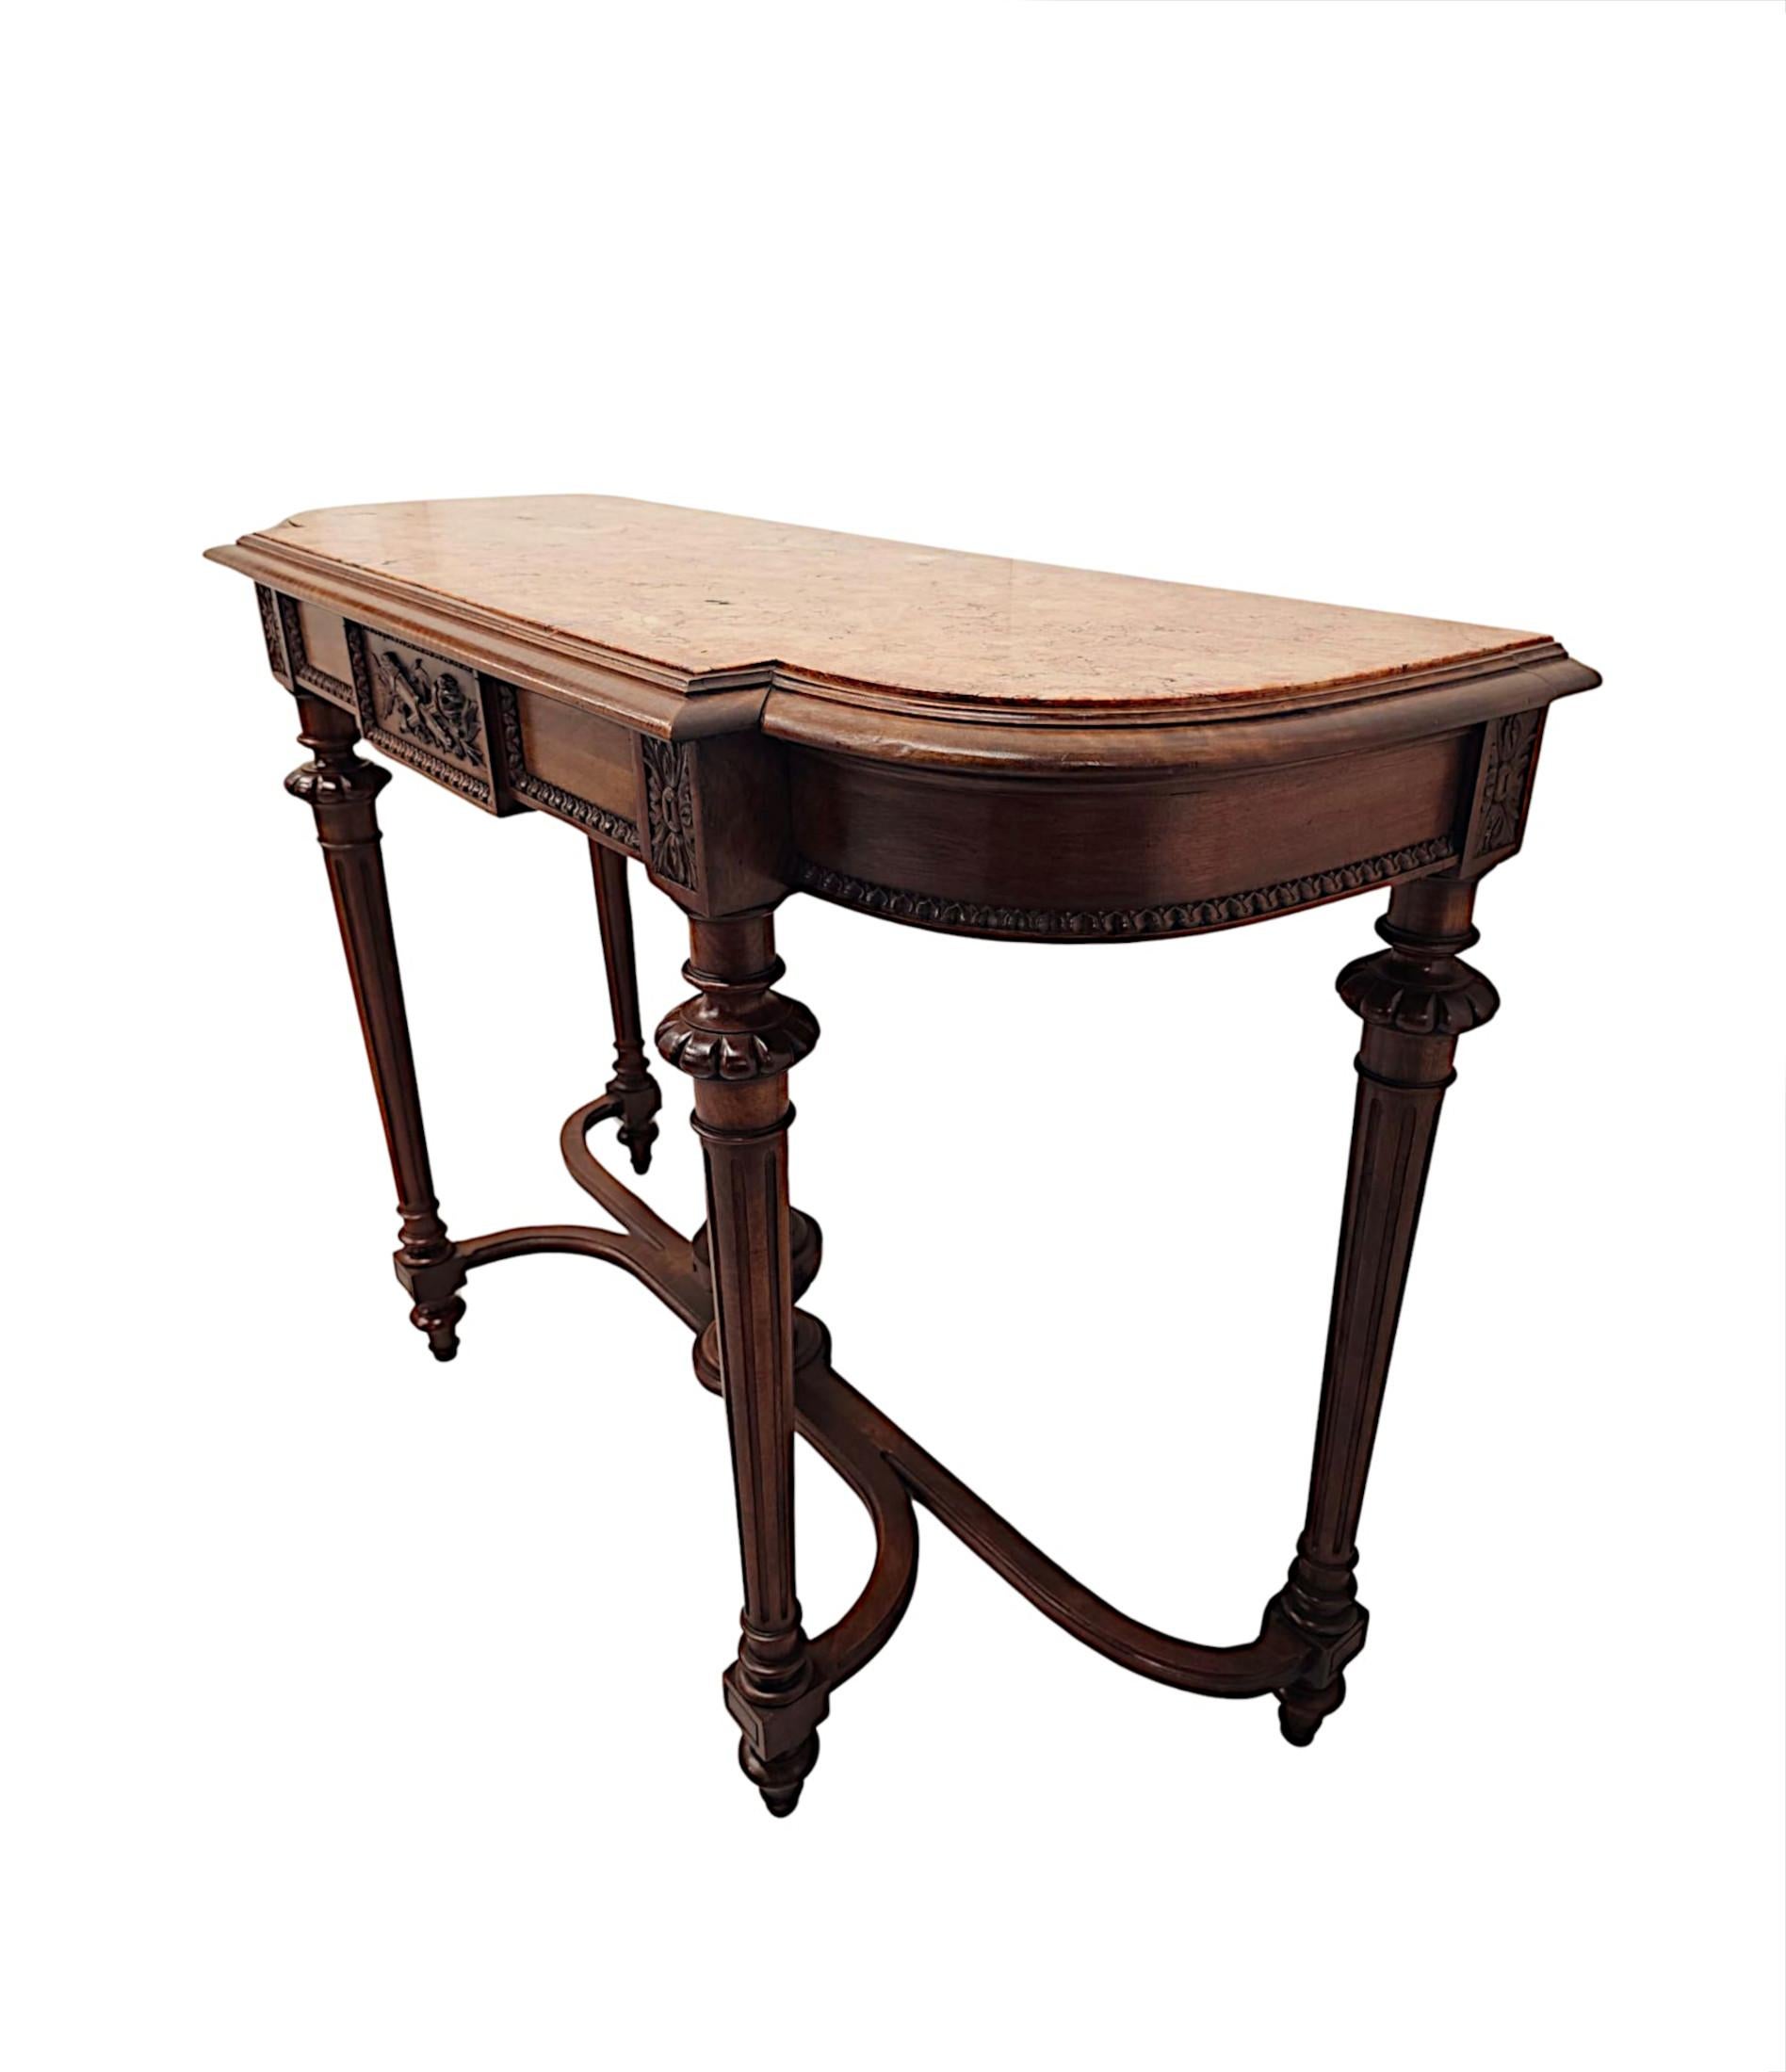 A very fine 19th Century well figured walnut marble top console table, superbly hand carved and of exceptional quality with gorgeously rich patination and fine grain.  The fabulous moulded and shaped Emperador marble top of rectangular form is